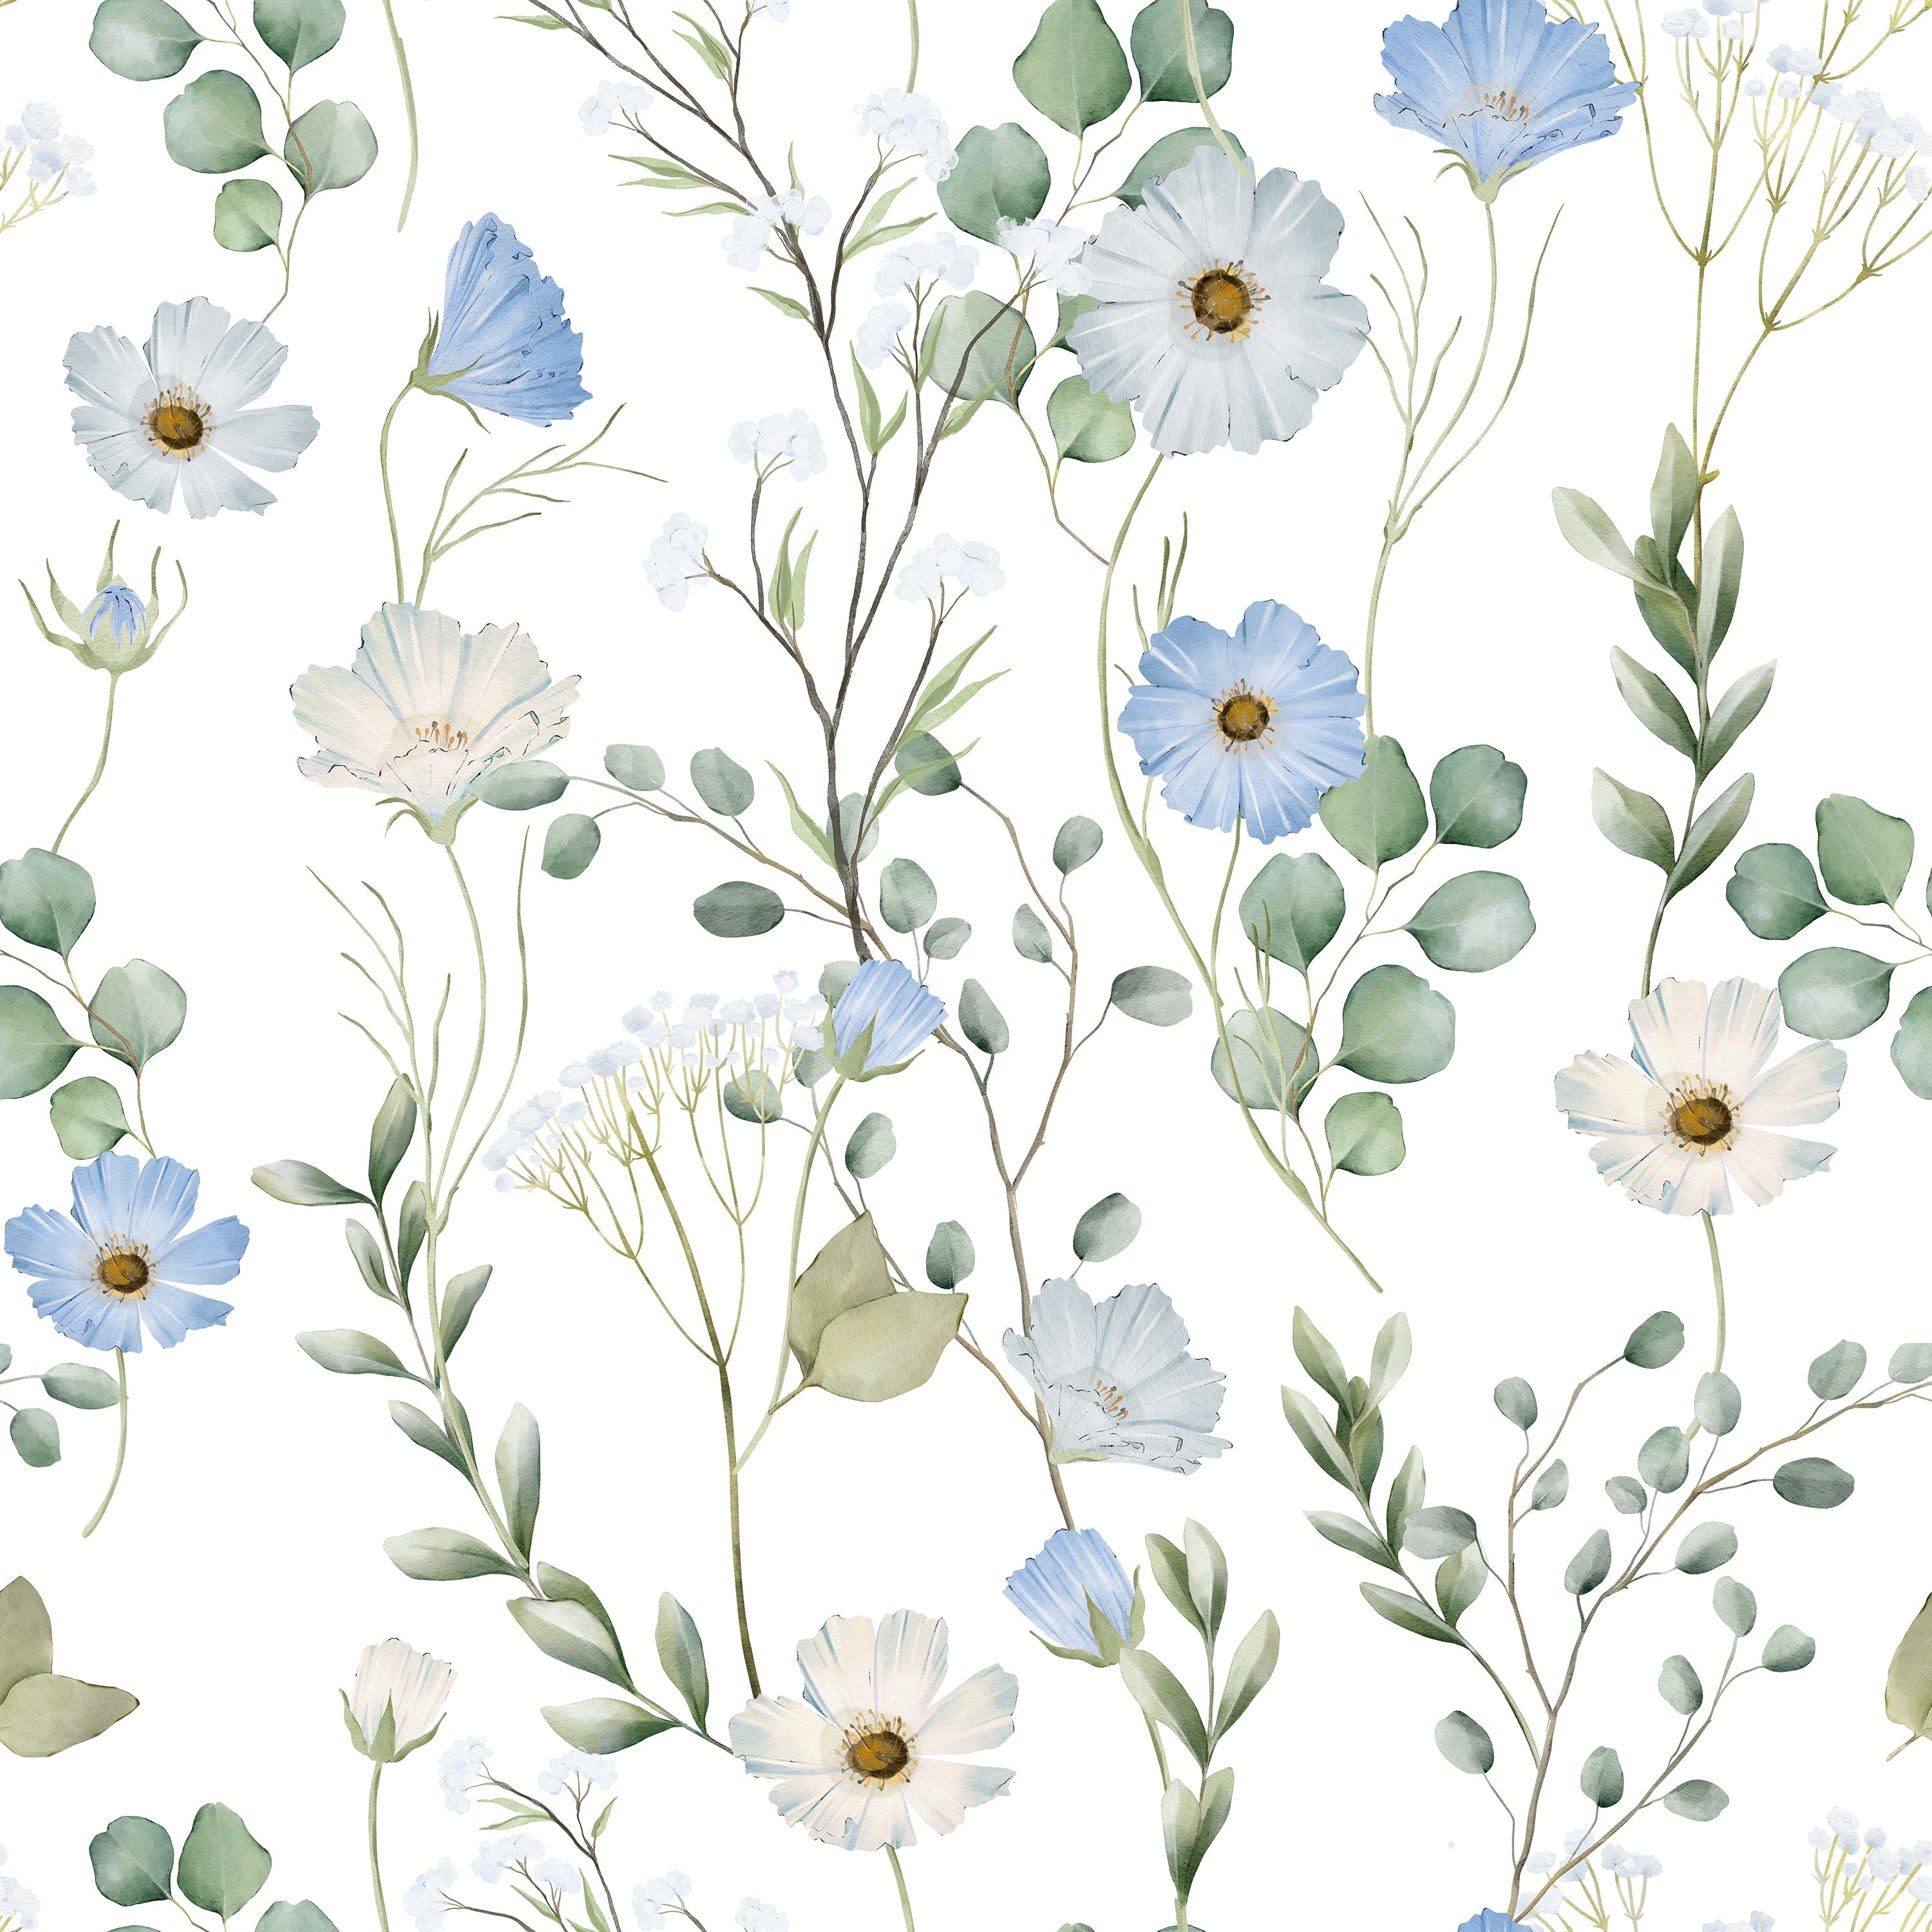 A wallpaper pattern displaying delicate botanical illustrations with various flowers in shades of blue and white, interspersed with green foliage, giving a light, airy feel that evokes a spring meadow